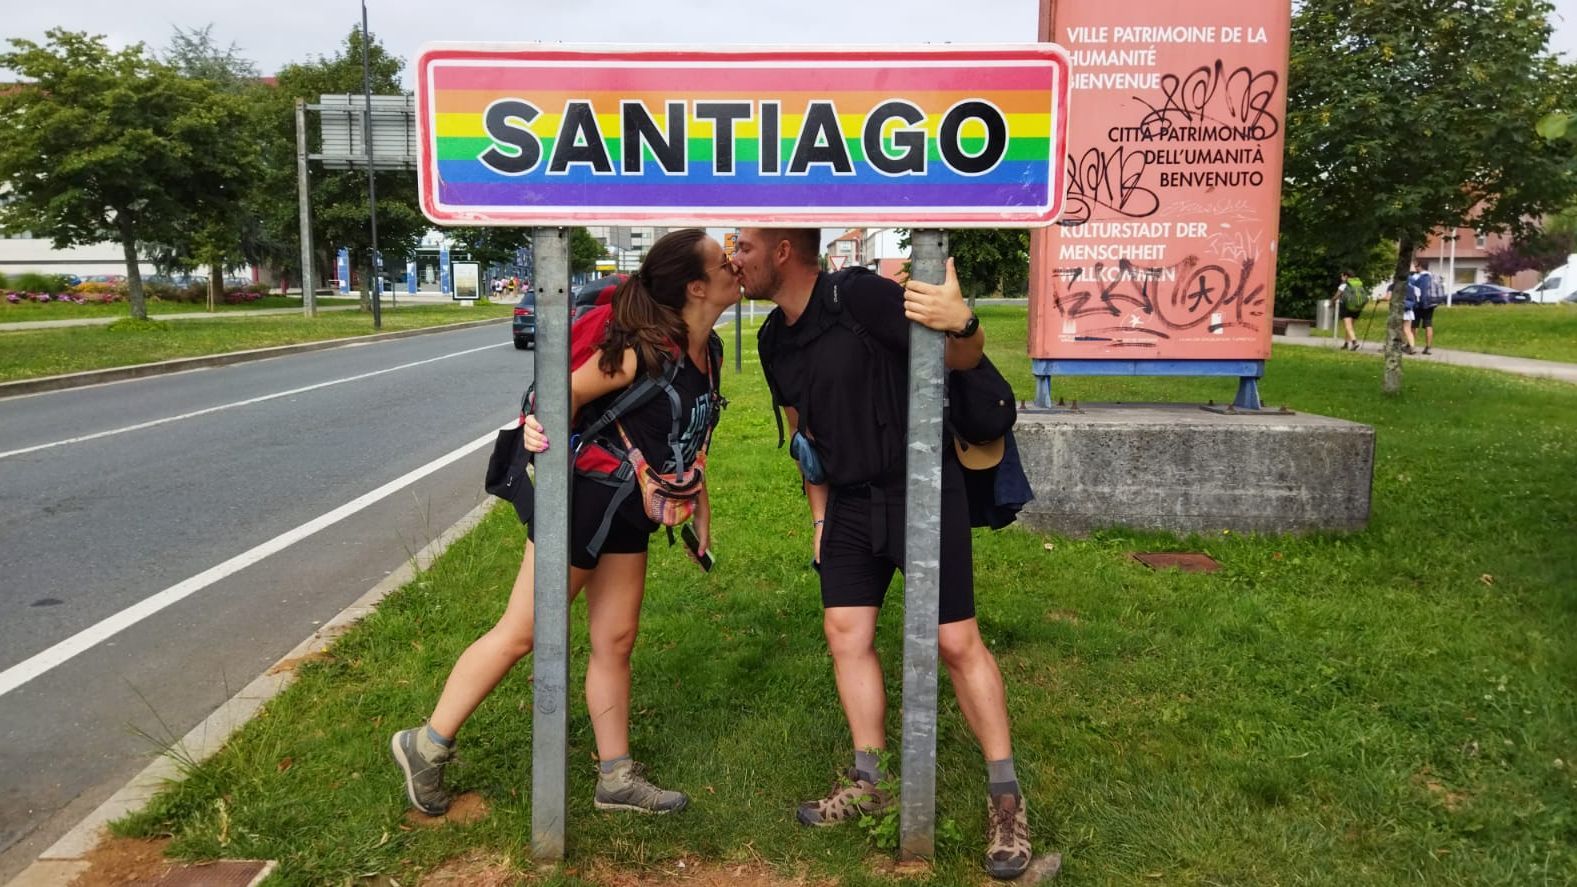 New record on the Camino de Santiago: 2022 is already the year with the most pilgrims in history